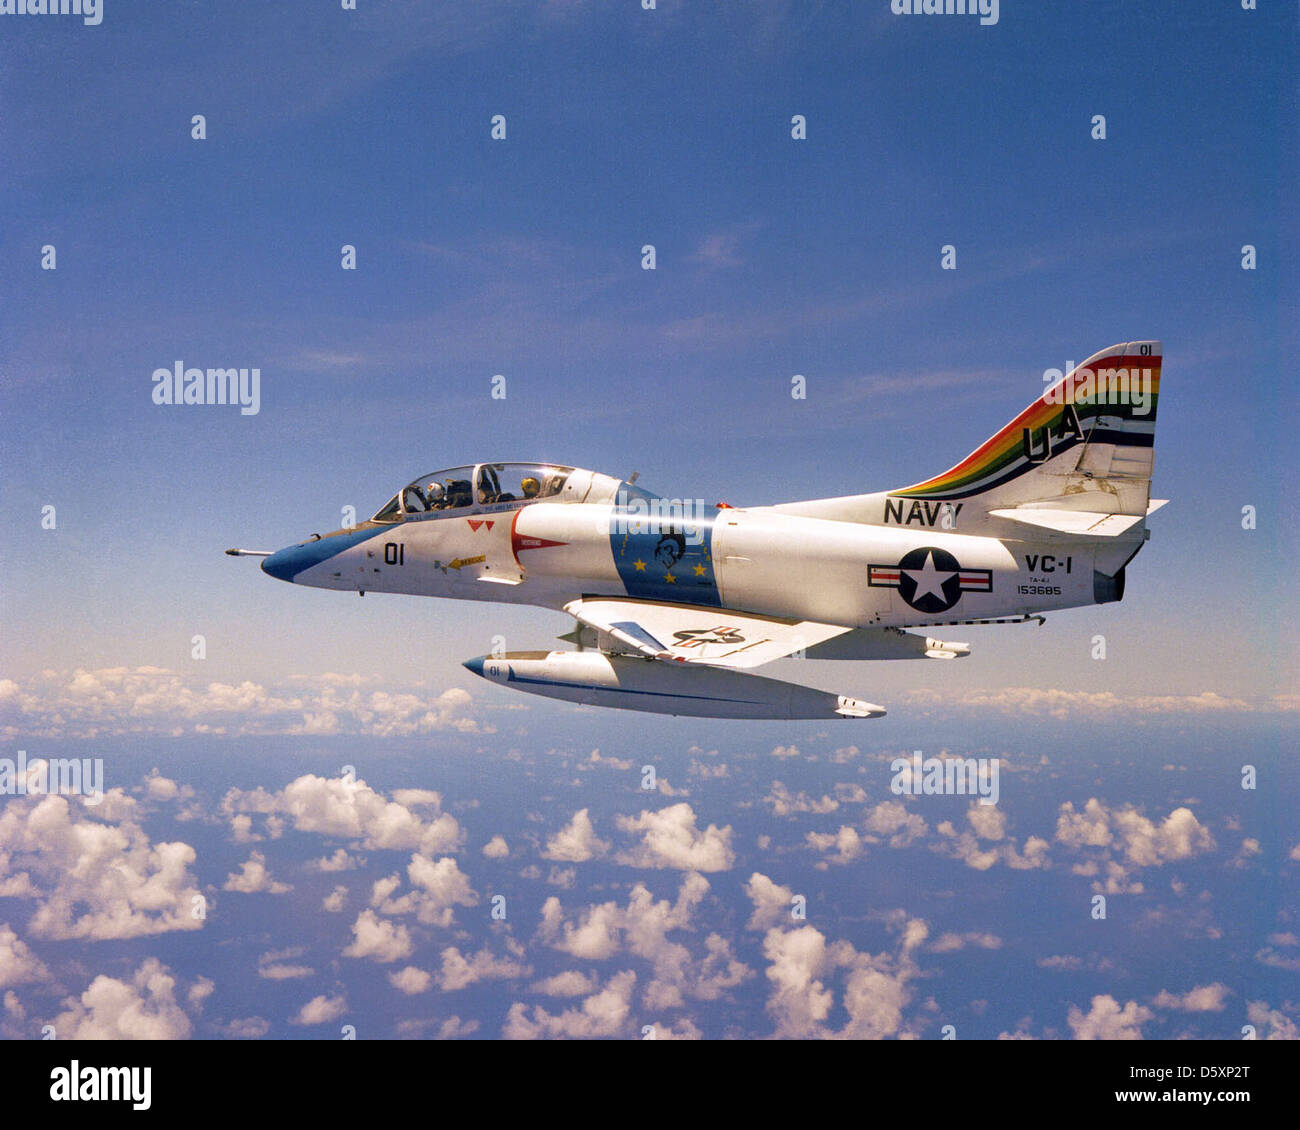 Douglas (TA-4F) TA-4J 'Skyhawk' from Fleet Composite Squadron 1 (VC-1), it is piloted by CMDR. Davis, the squadron's X/O. Stock Photo